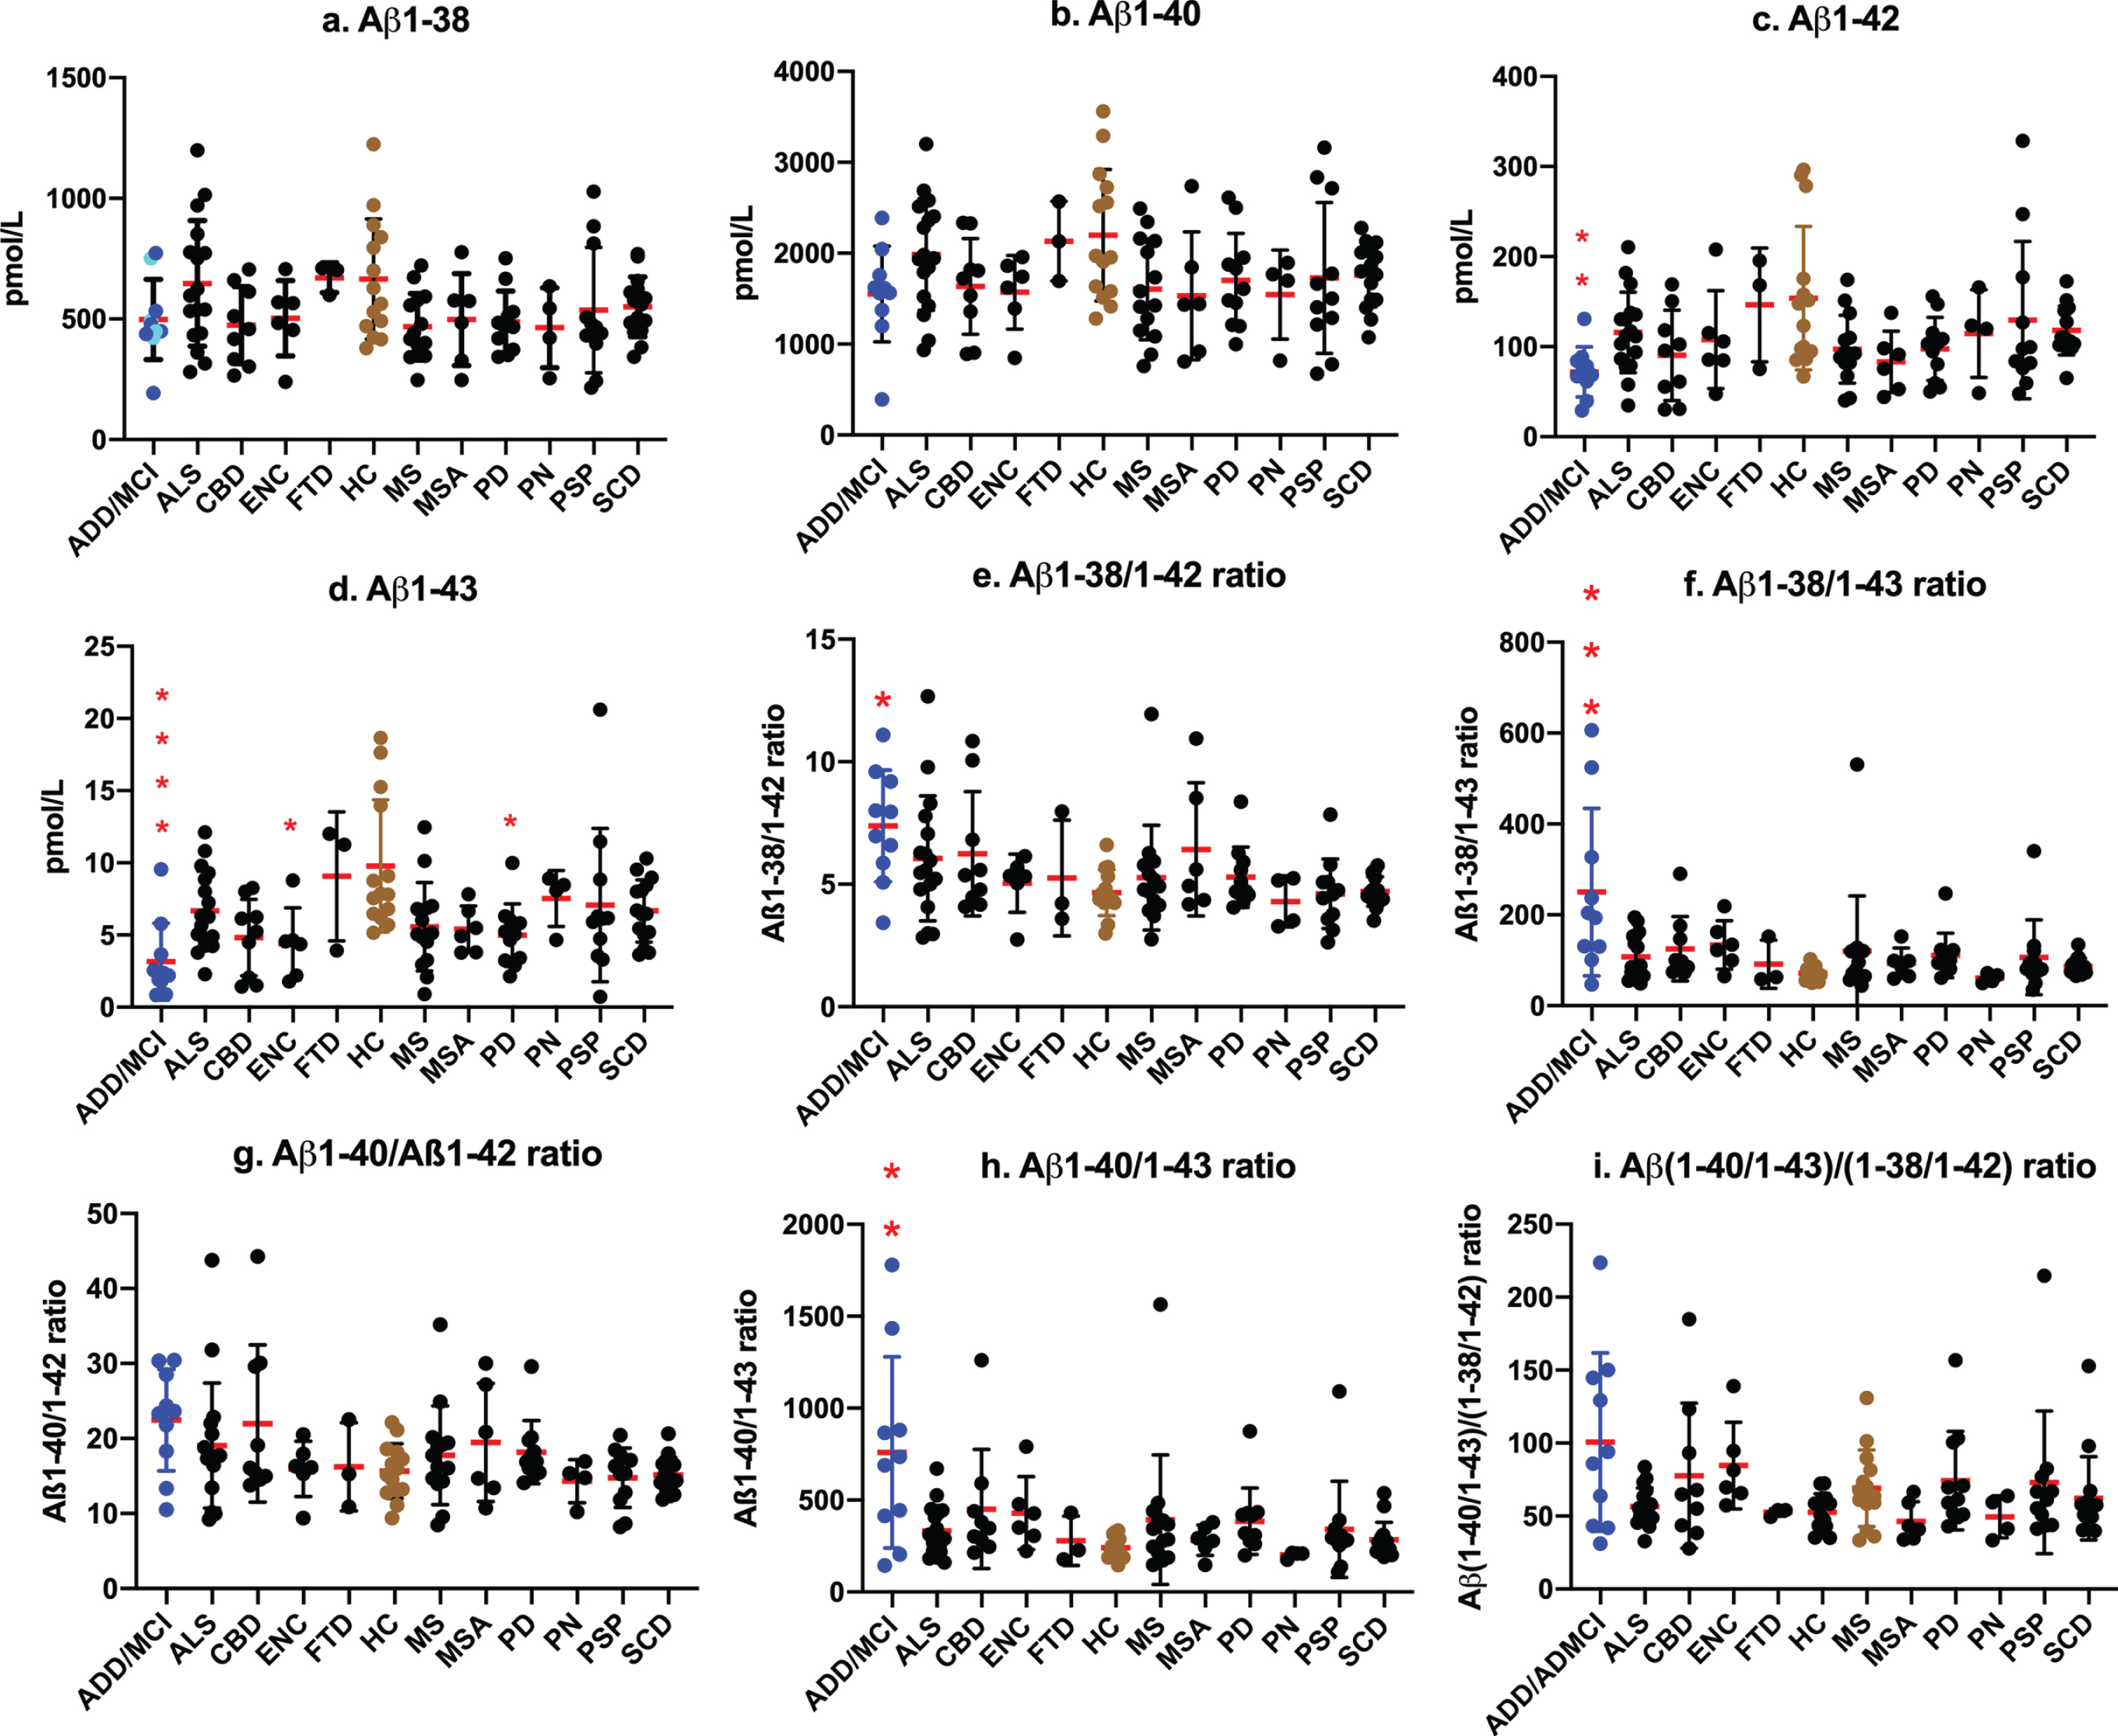 Values of CSF Aβ species and ratios among neurological diseases and controls. No significant differences were observed in Aβ1-38 and Aβ1-40 levels among ADD/ADMCI and other neurological diseases and CU (a, b). Aβ1-42 levels were significantly lower in ADD/ADMCI than in CU (p = 0.0066; c). CSF Aβ1-43 values were significantly lower in ADD/ADMCI (d; p < 0.0001), ENC (p = 0.0297), and PD (p = 0.0281) than in CU. The Aβ1-38/Aβ1-42 and Aβ1-38/Aβ1-43 ratios were significantly higher in ADD/ADMCI than in CU (e: p = 0.021; f: p = 0.0004). Ratios of Aβ1-40/Aβ1-42 and Aβ1-40/Aβ1-42 + Aβ1-43 were not significant (g: p = 0.1226 in Aβ1-40/Aβ1-42 ratio; p = 0.0895 in Aβ1-40/Aβ1-42 + Aβ1-43 ratio). The Aβ1-40/Aβ1-43 ratio was significantly increased (h: p = 0.0033). The Aβ (1-40/1-43)/Aβ (1-38/1-42) ratio was not significantly changed in ADD/ADMCI and other diseases (i). (a: Blue circles  represent sporadic ADD and ADMCI, cyan circles  represent familial AD).